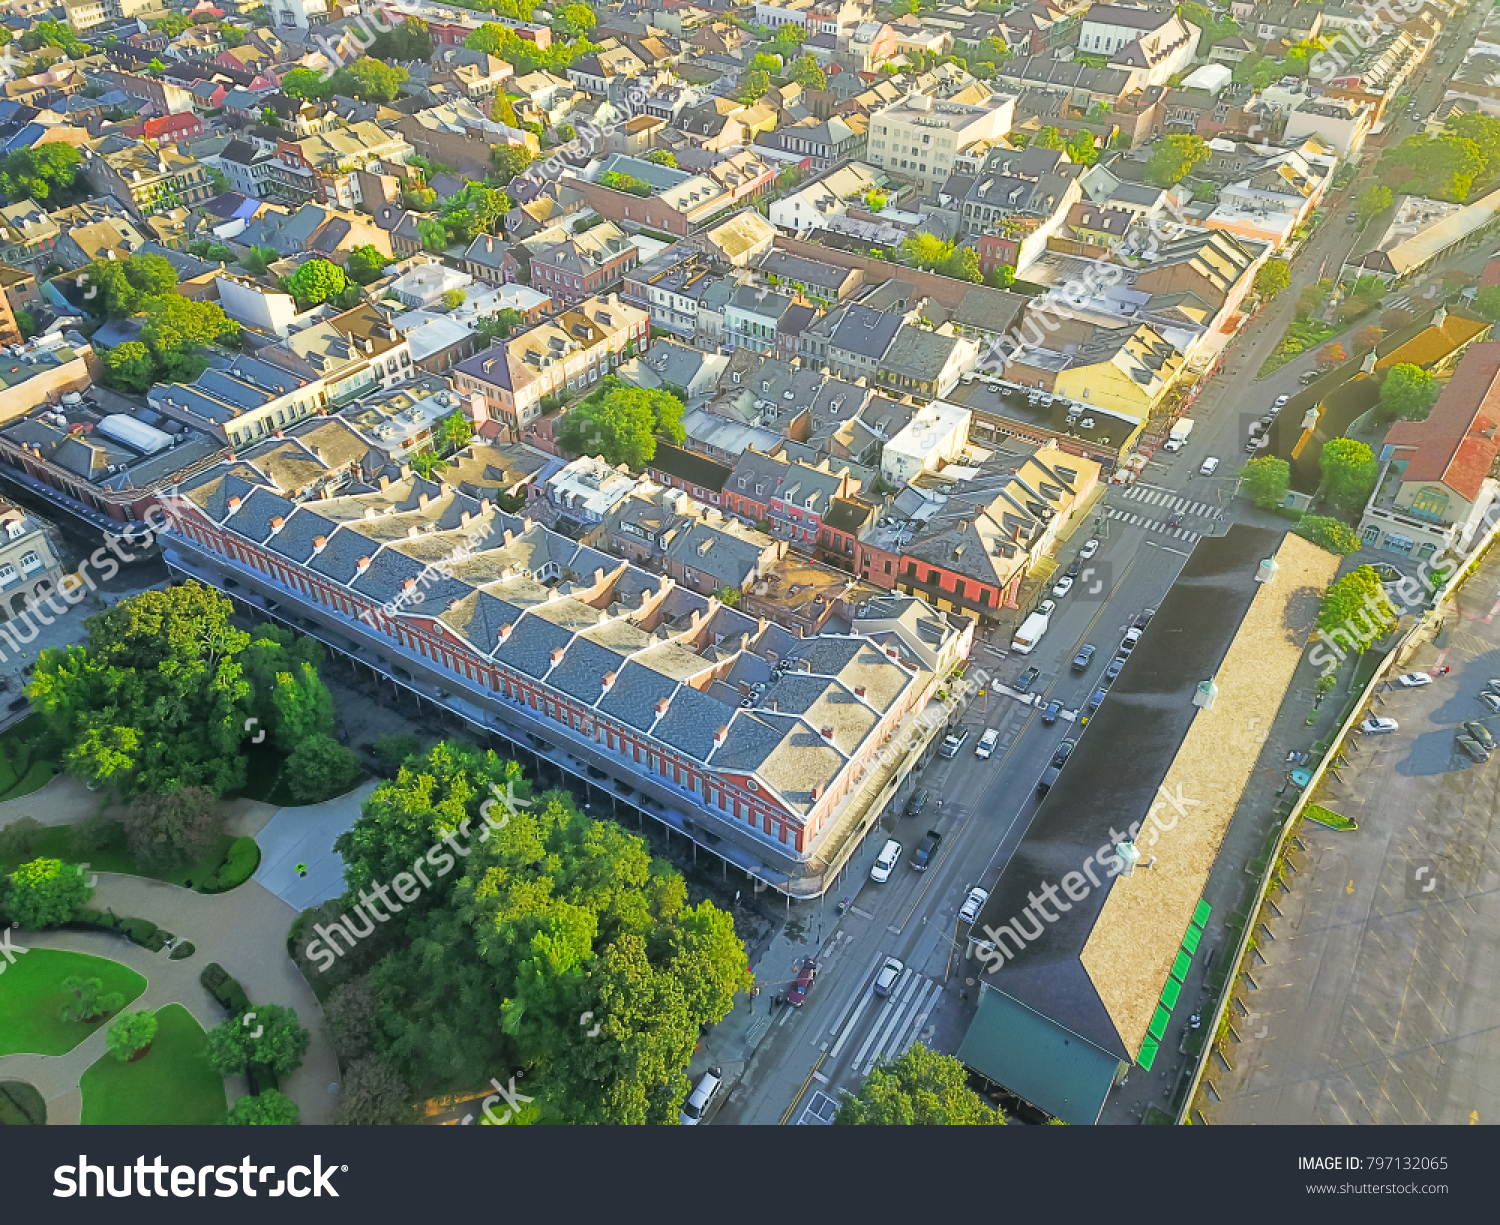 Aerial view French Quarter with extant historical buildings from 19th century and part of Jackson Square. The historic district section of the city of New Orleans, Louisiana, USA. #797132065